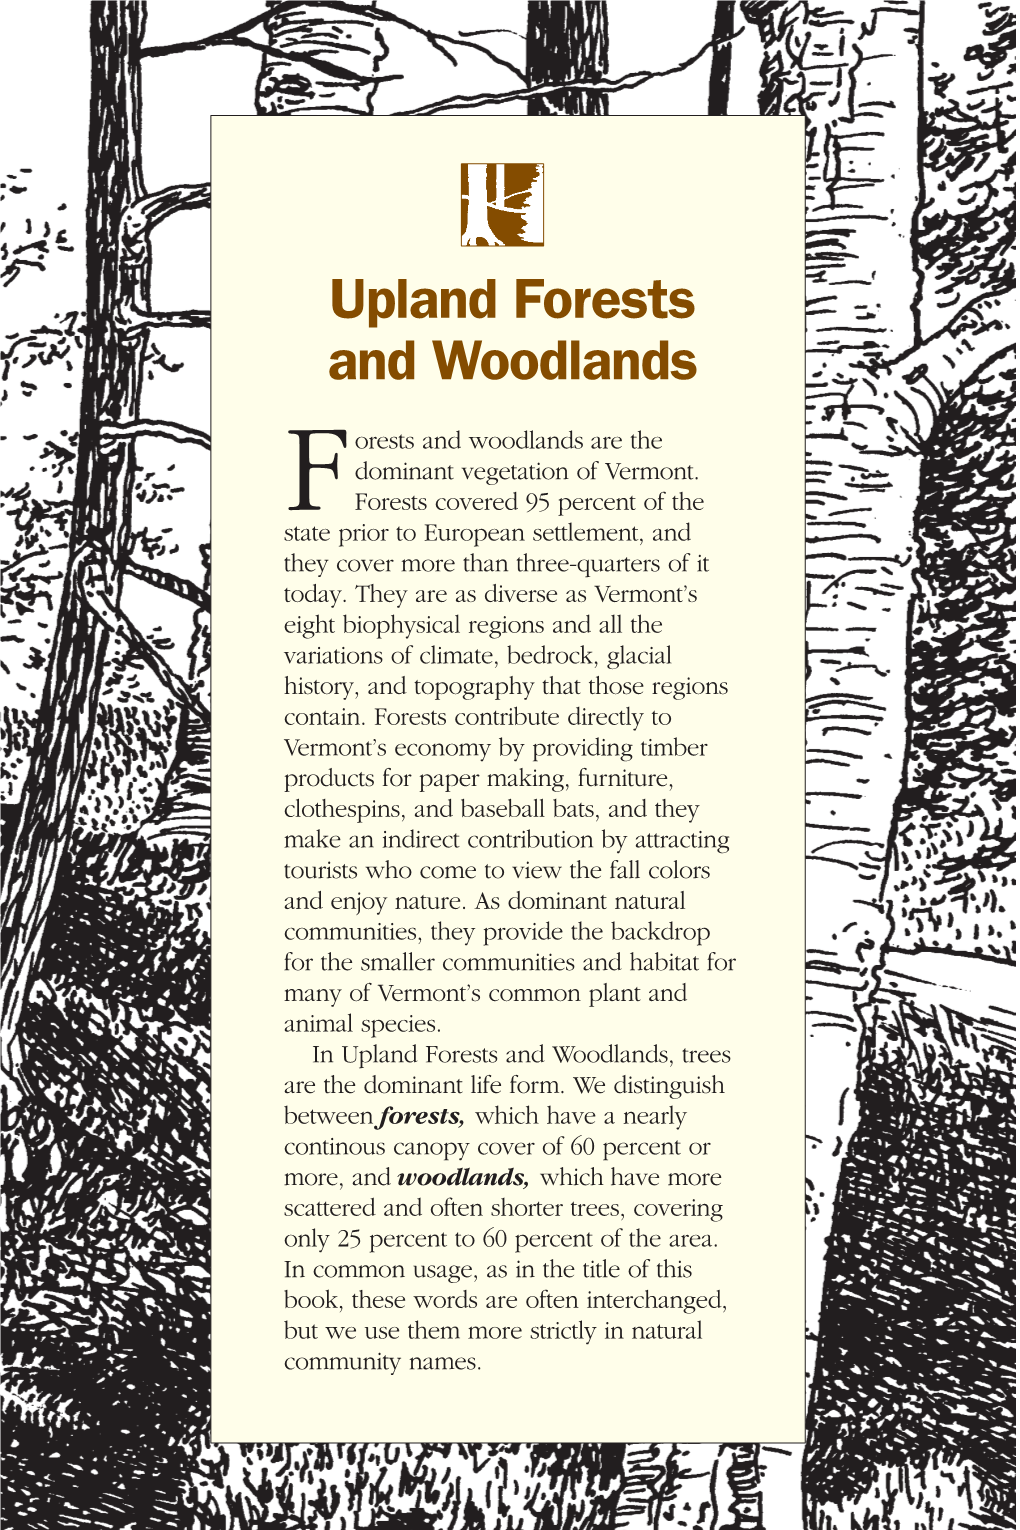 Upland Forests and Woodlands